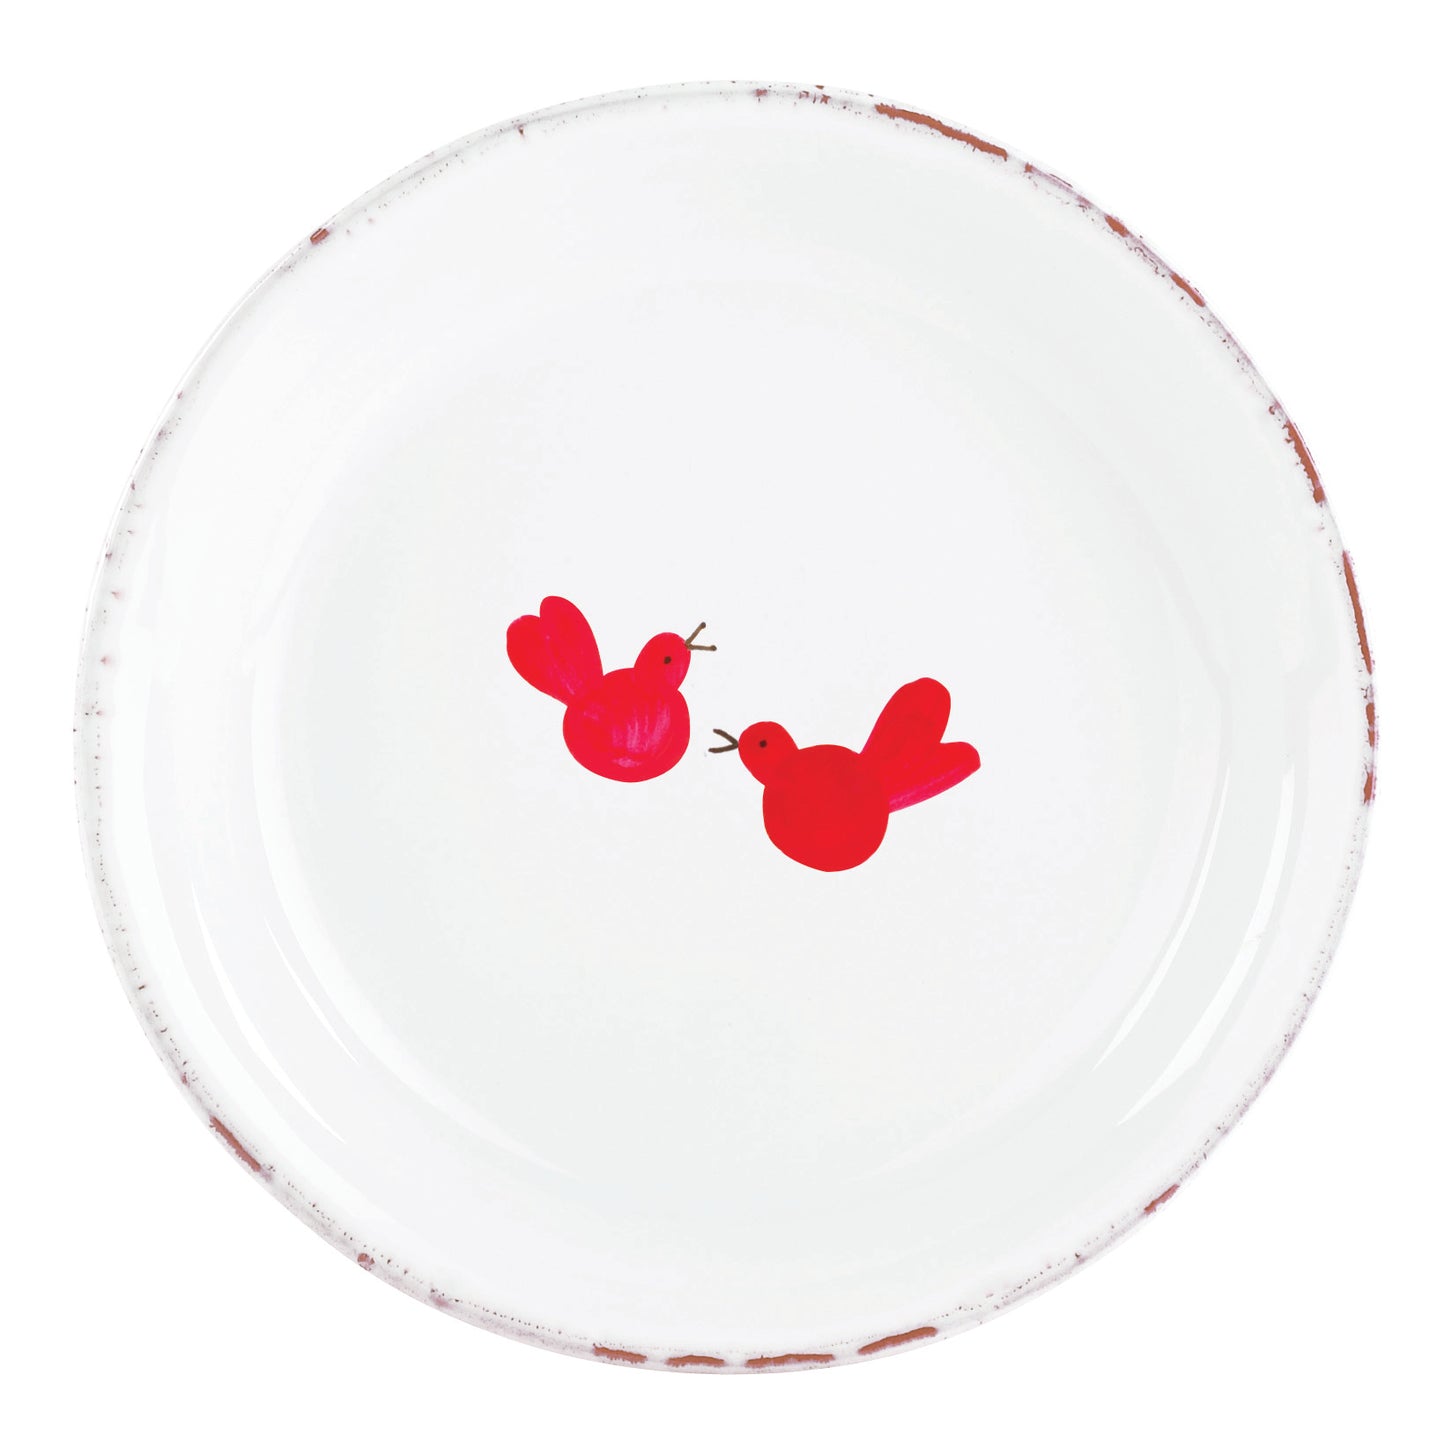 whote plate with two red birds in center on white background.